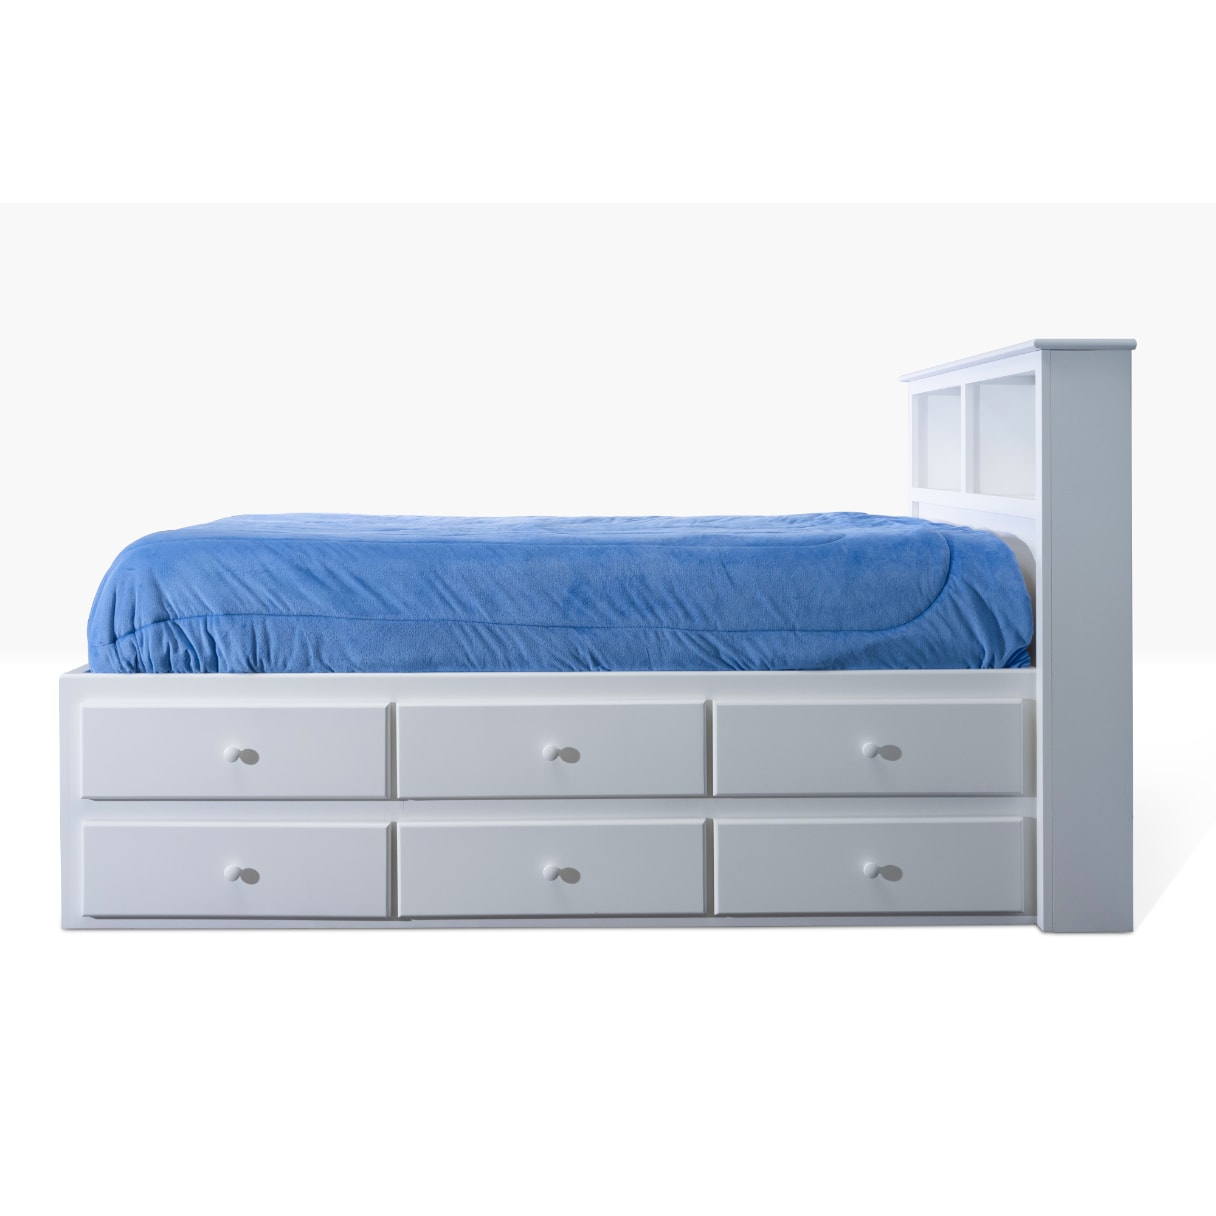 Acadia Cottage Storage Bed with 6 drawers on each side and a book case headboard for storage. Pictured in white from the side to highlight storage areas.